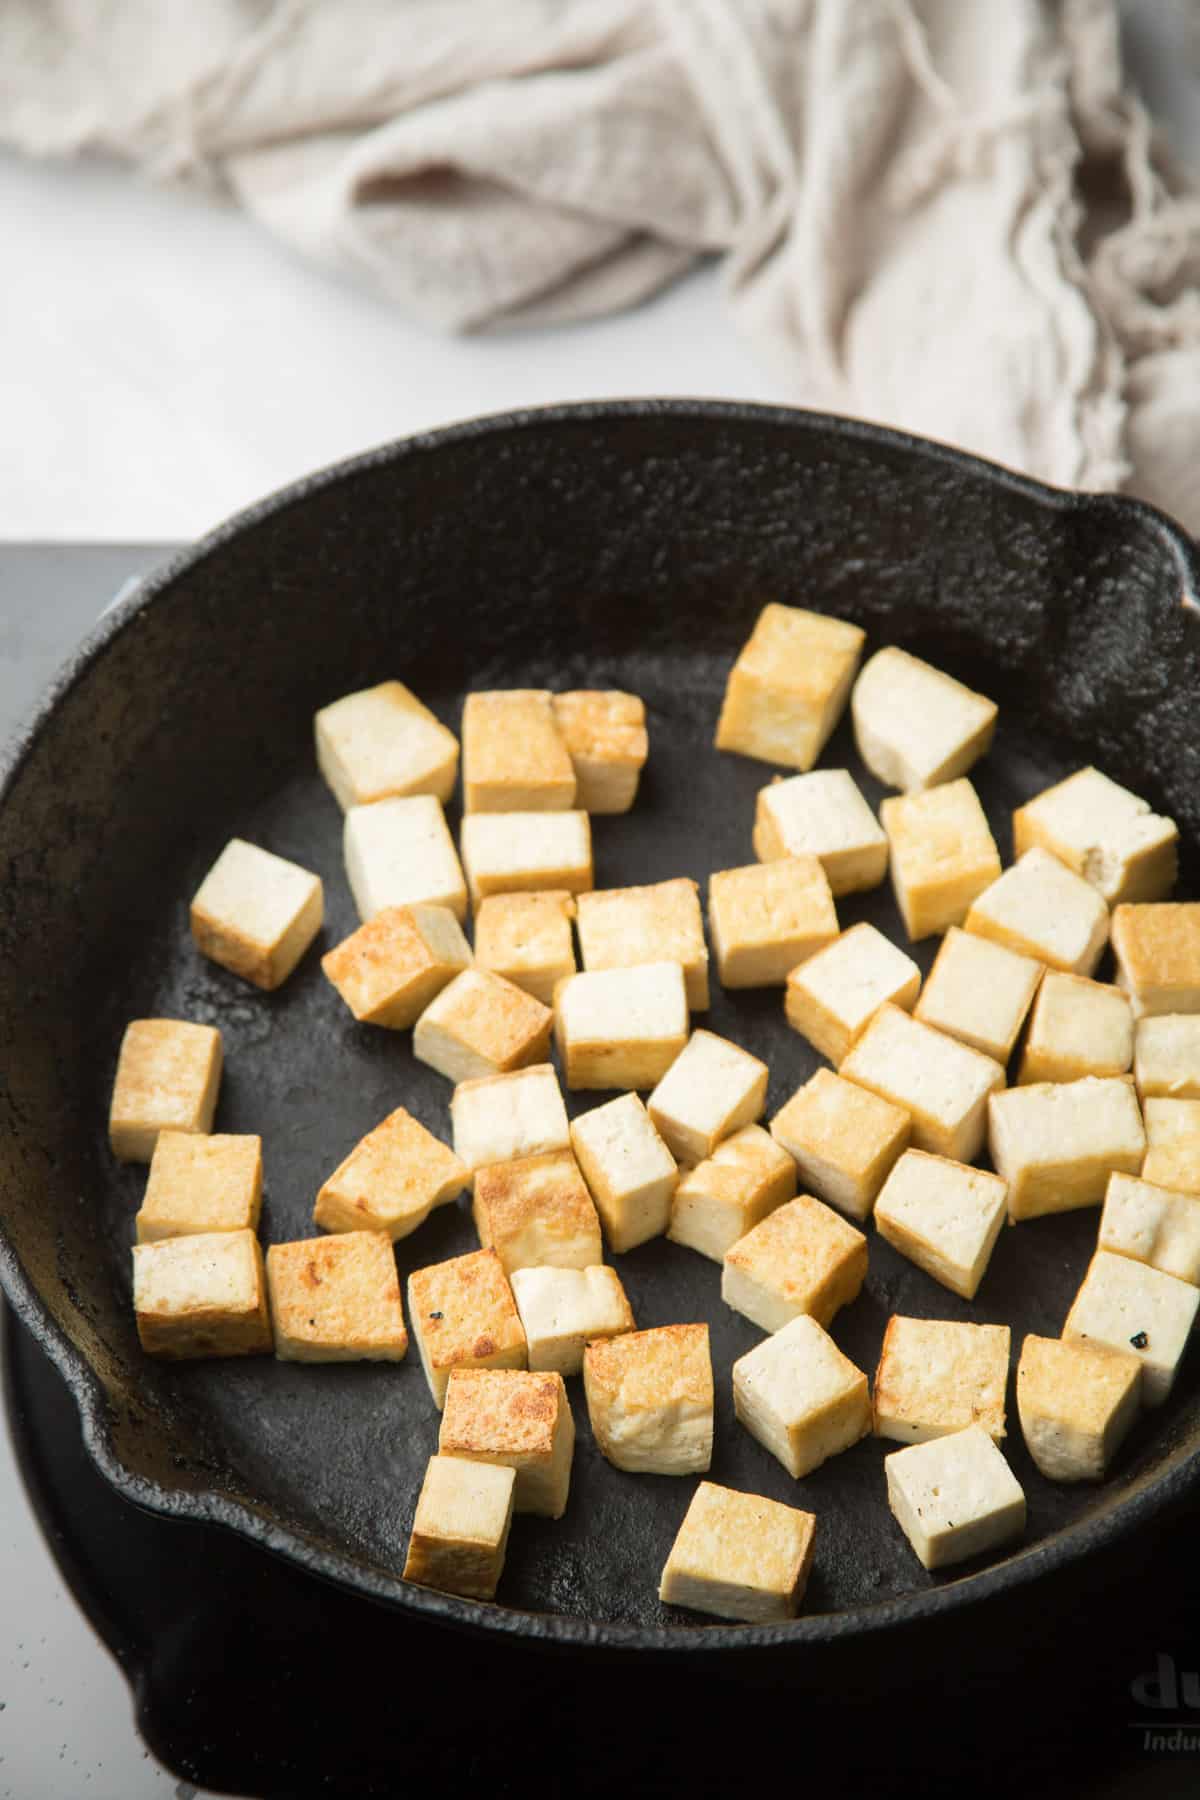 Tofu Cubes frying in a skillet.